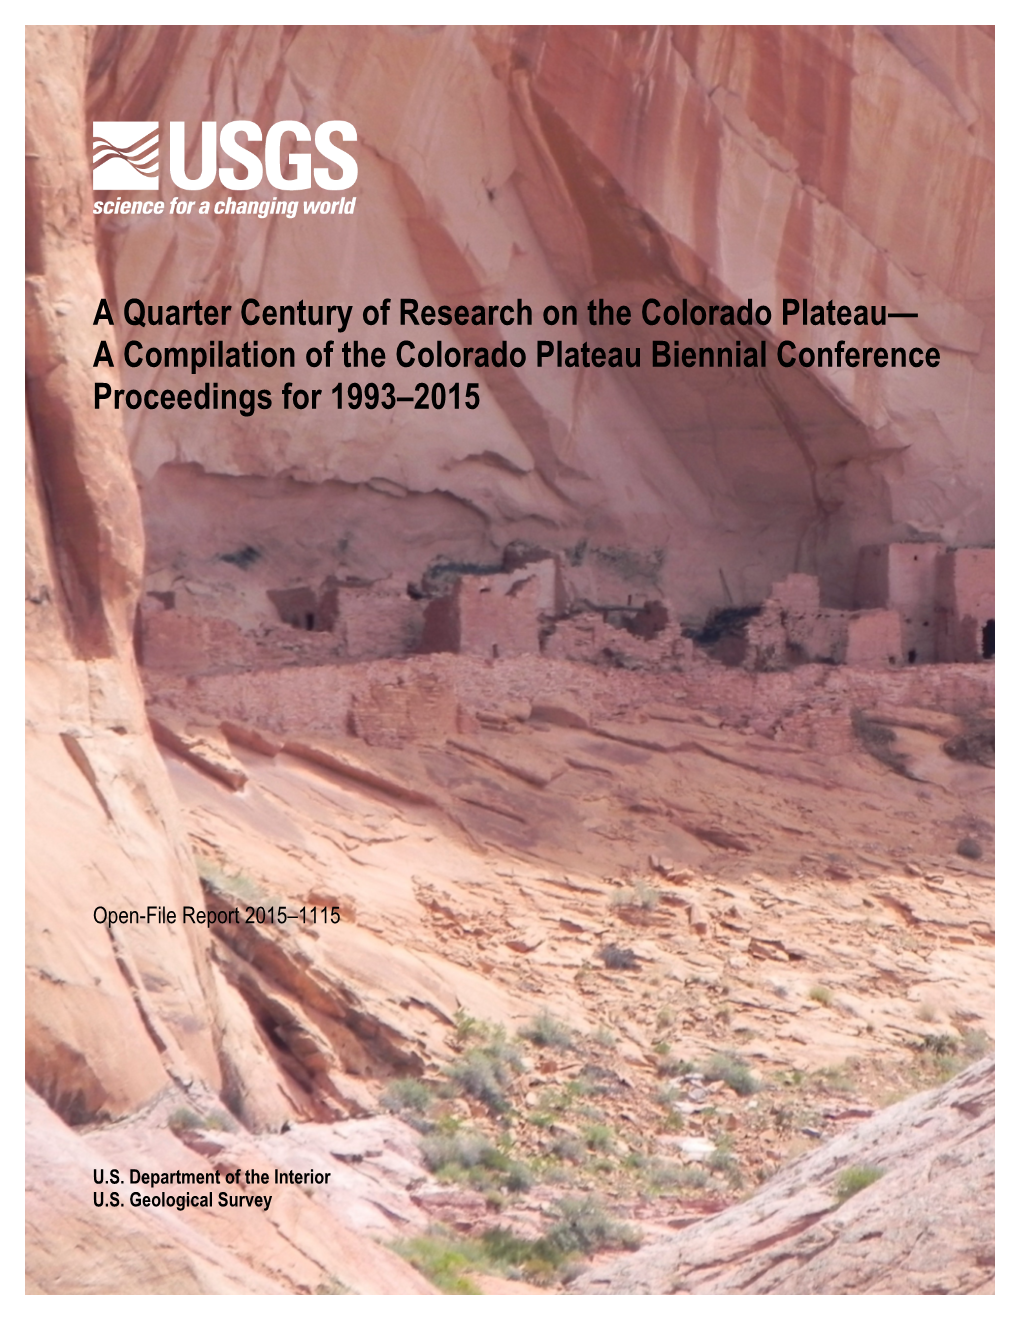 A Quarter Century of Research on the Colorado Plateau— a Compilation of the Colorado Plateau Biennial Conference Proceedings for 1993–2015